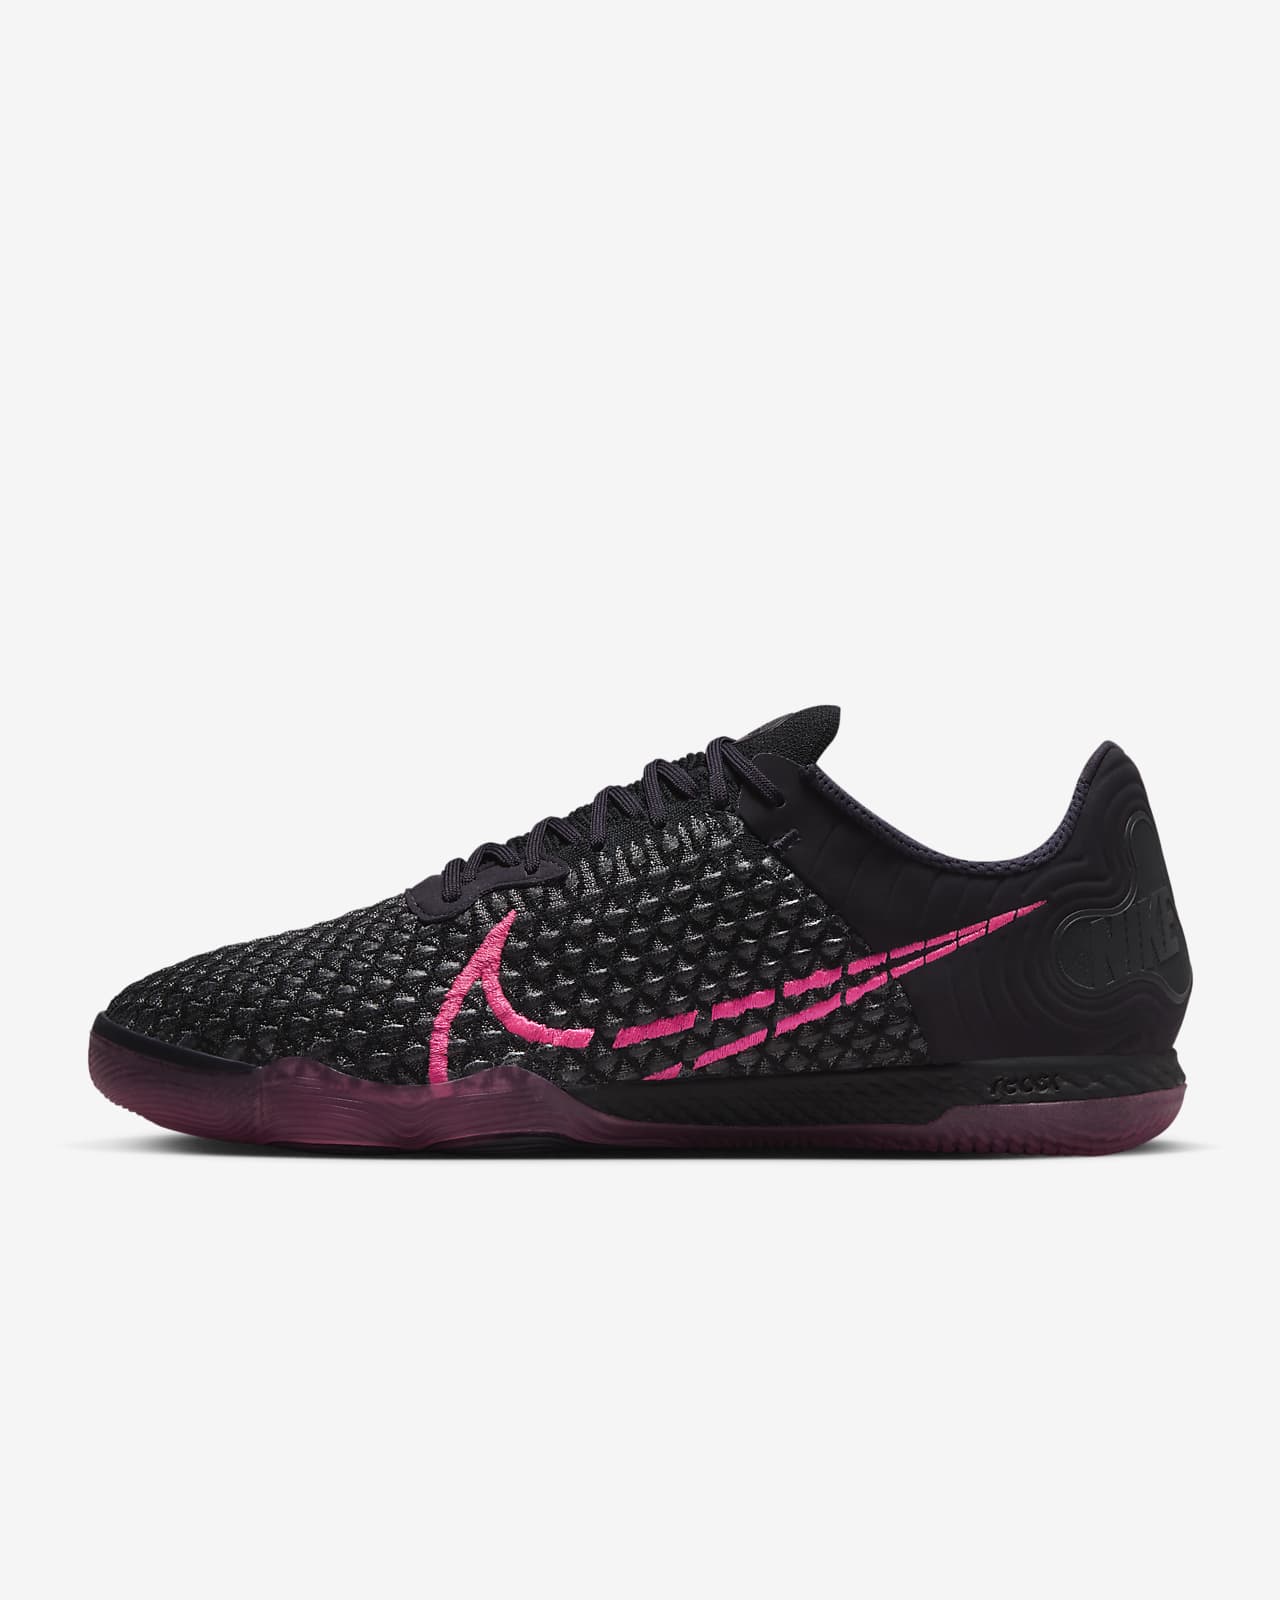 Nike React Gato Indoor/Court Soccer Shoes